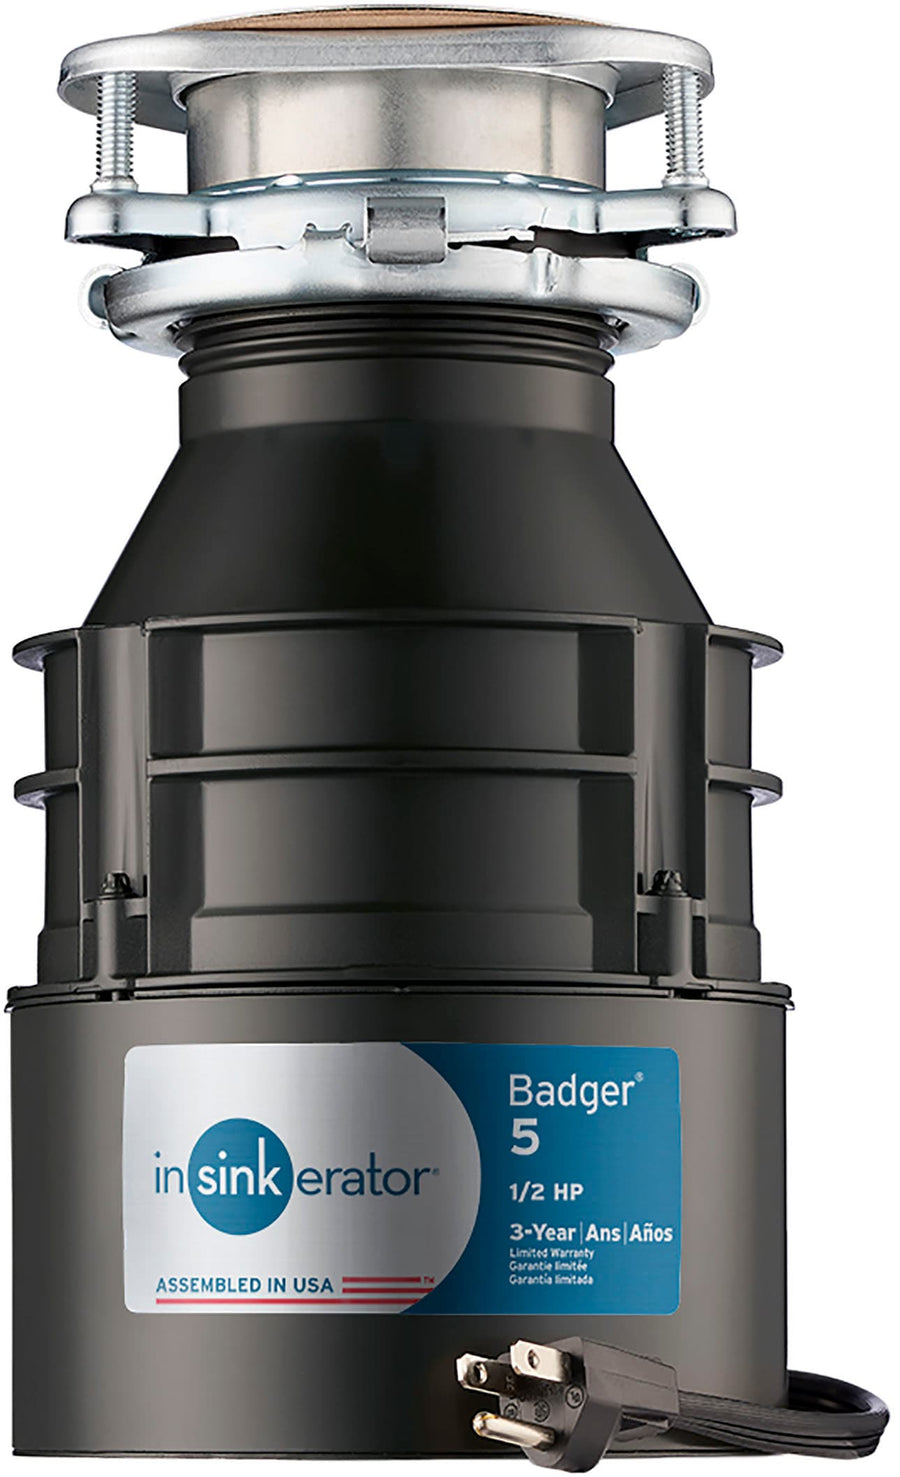 InSinkerator - Badger 5 Standard Series 1/2 HP Continuous Feed Garbage Disposal with Power Cord - Grey_0